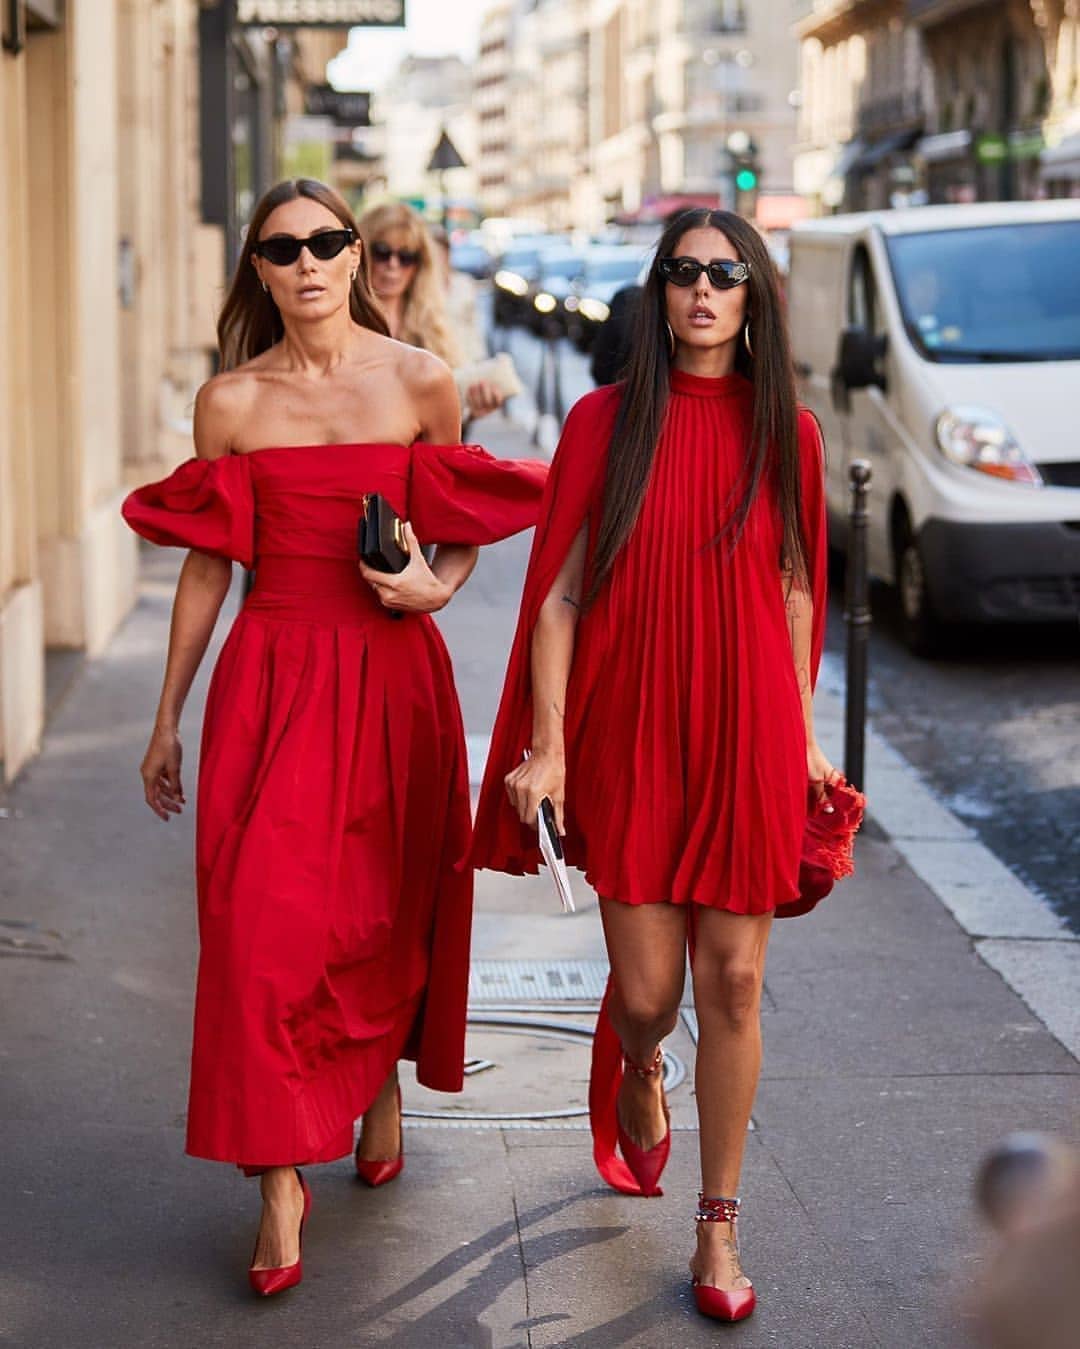 MÉLÒDÝ JACÒB: How to dress in red - 27 hottest red summer outfits for women